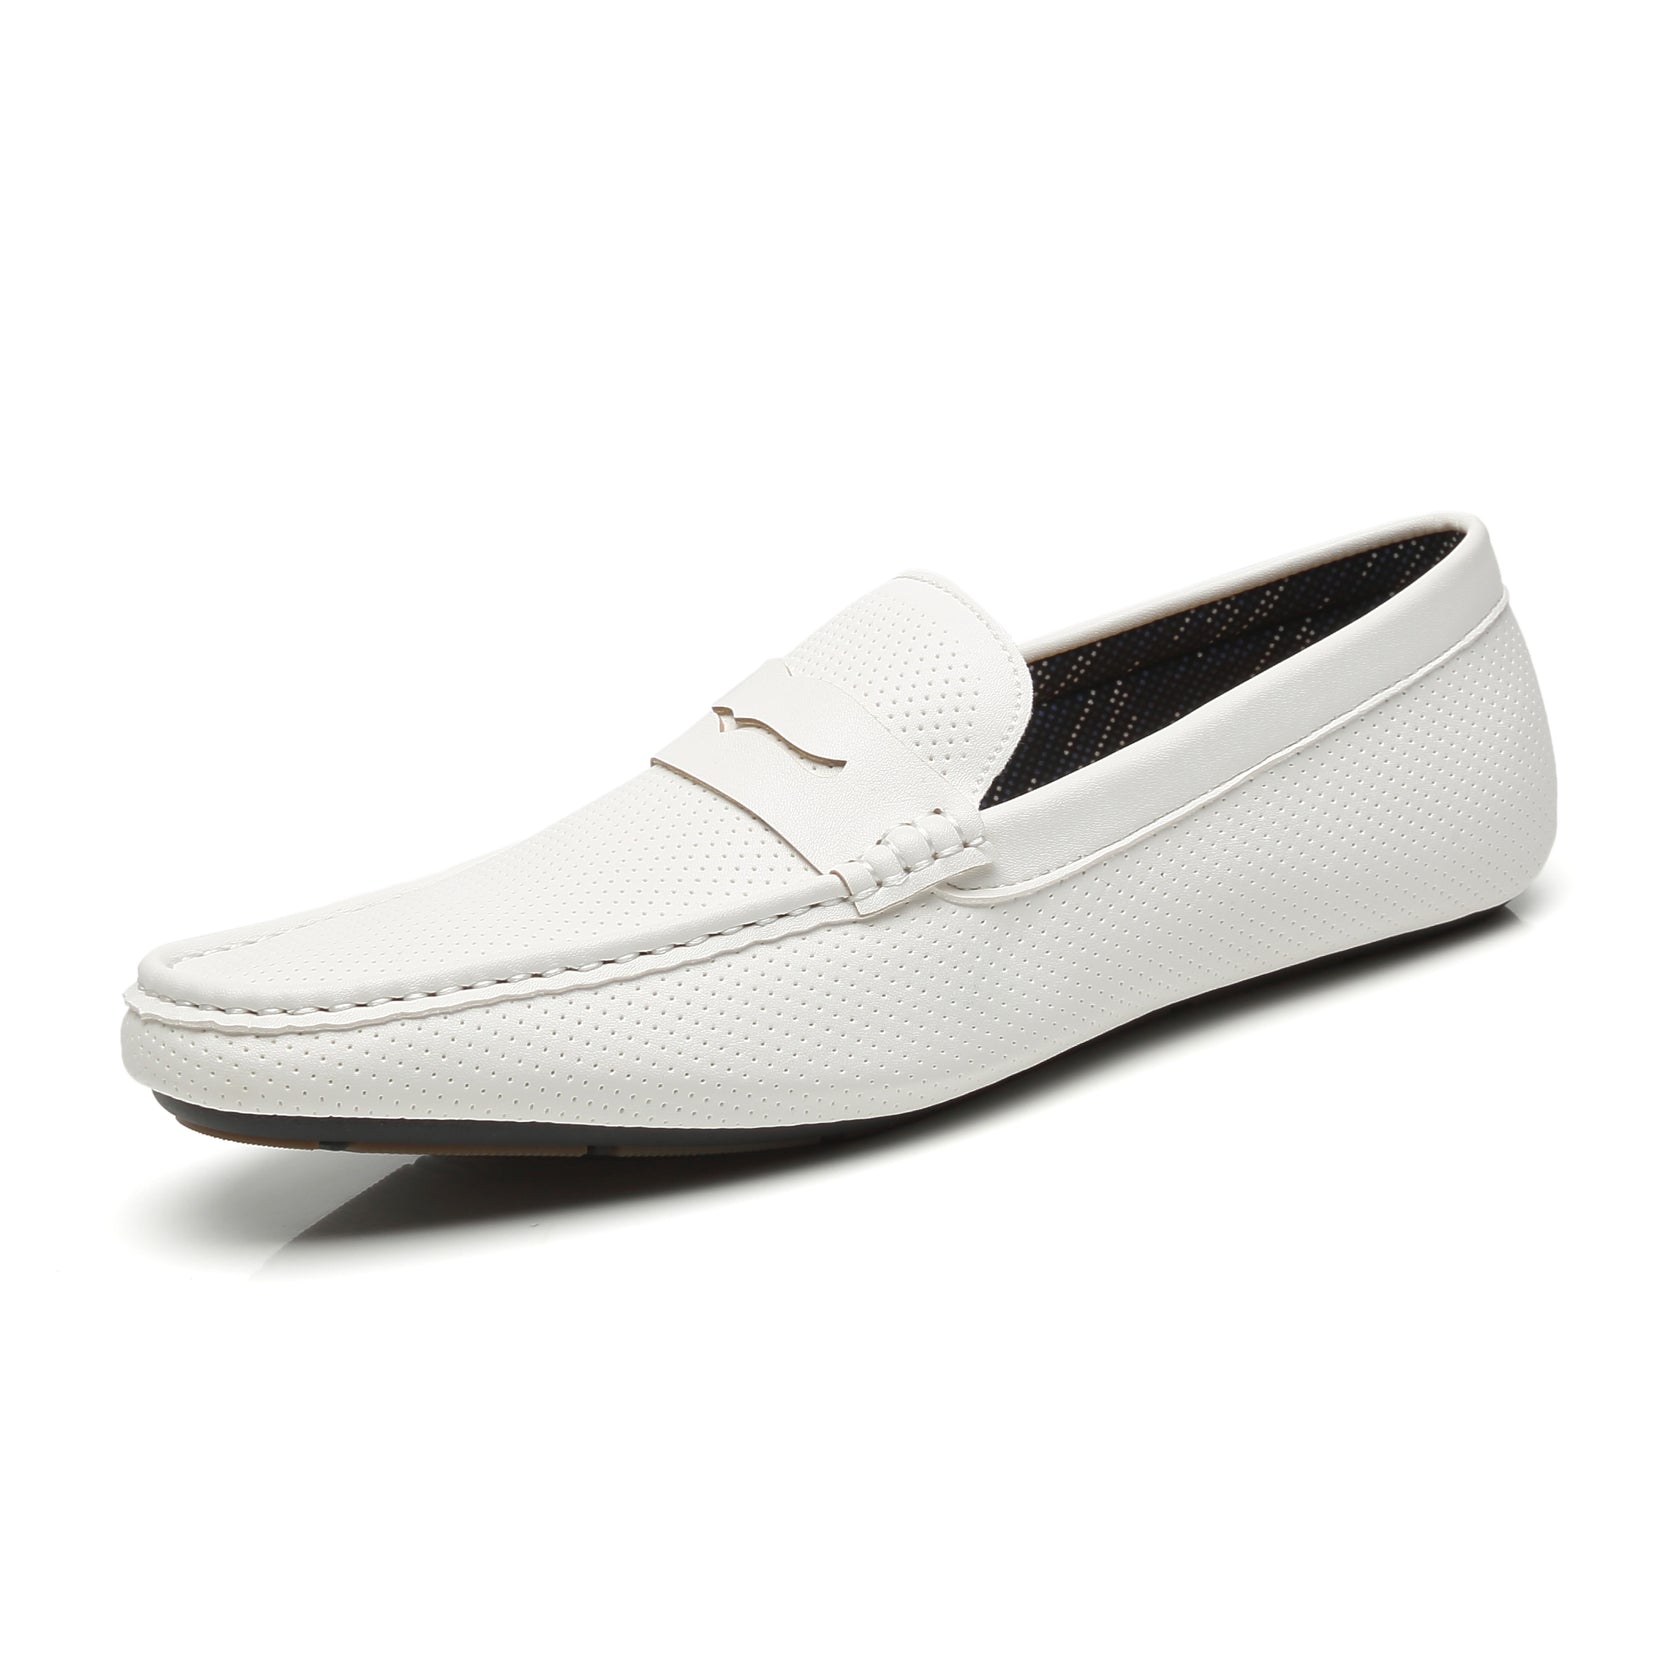 Men's Penny loafers Driving Moccasins Serpent-1-white | La Milano Mens ...